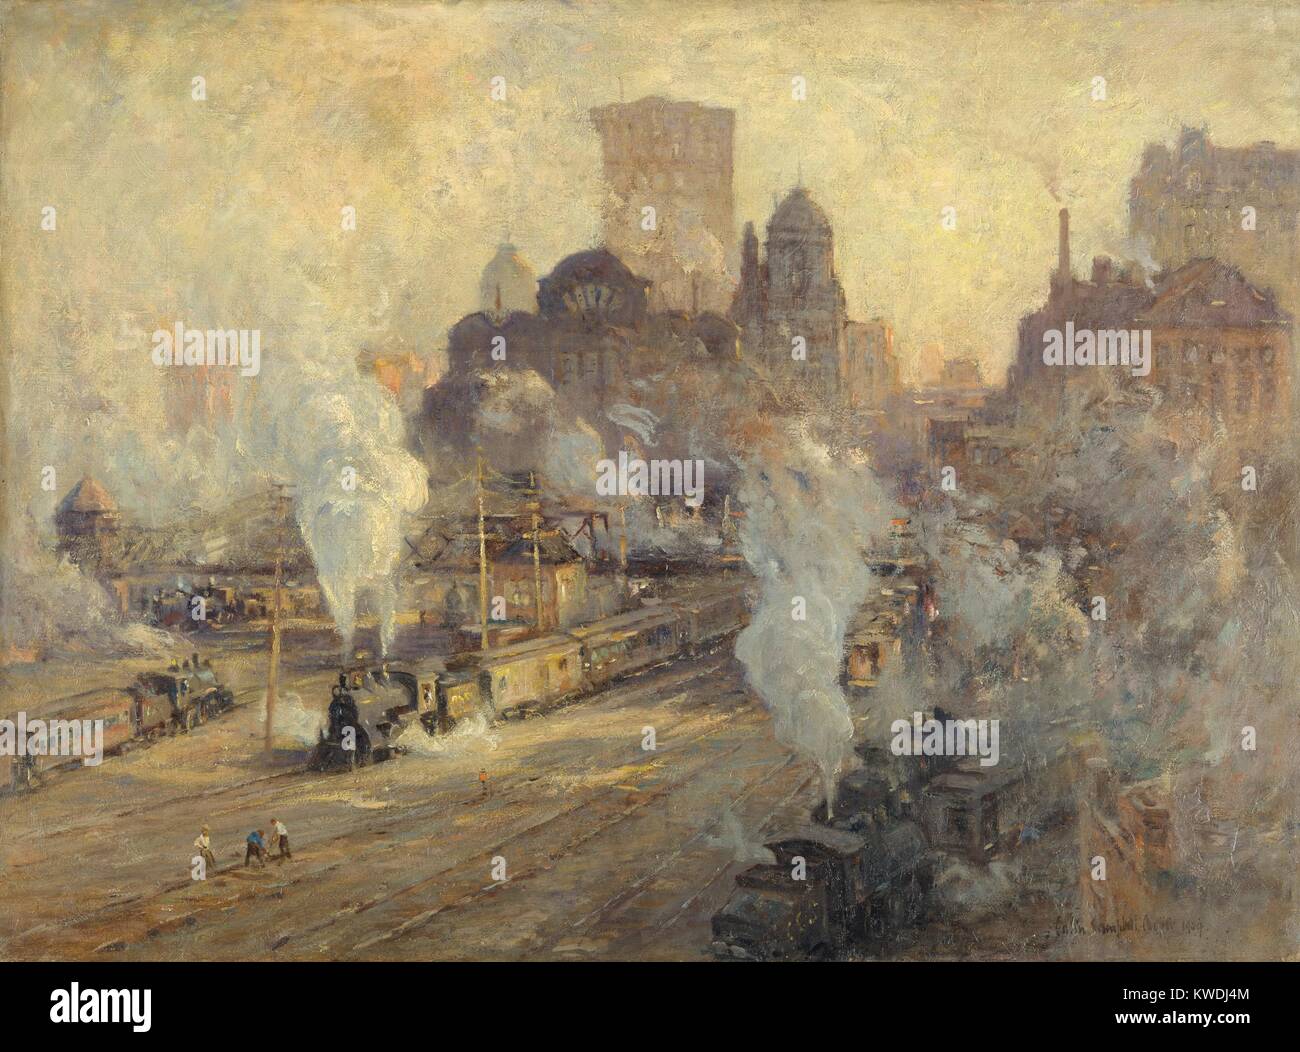 GRAND CENTRAL TERMINAL, by Colin Campbell Cooper, 1909, American painting, oil on canvas. The train yard of Grand Central Station during the ten year demolition and construction of the new Grand Central Terminal from 1903-1913 (BSLOC 2017 9 12) Stock Photo